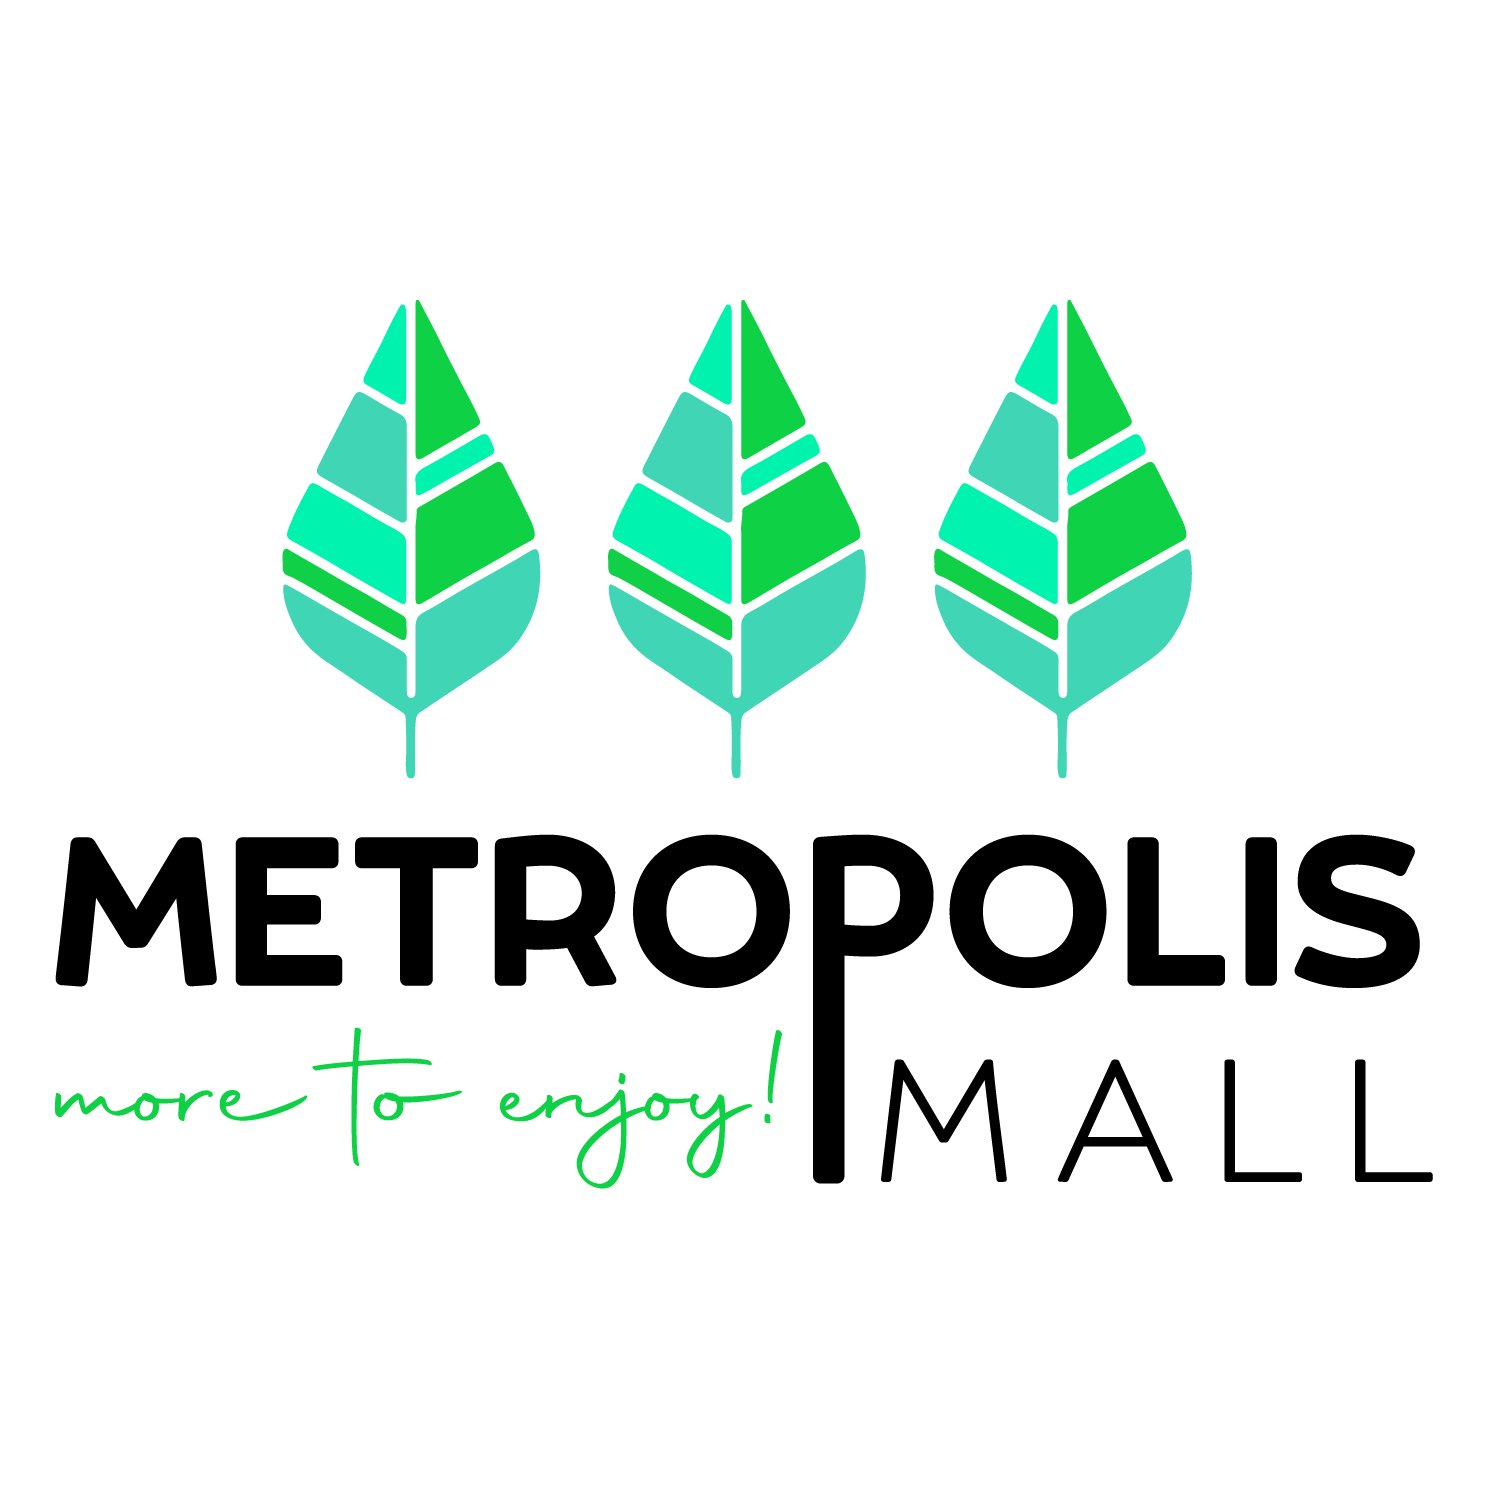 image The Metropolis Mall is opening its doors this summer, at the end of July!